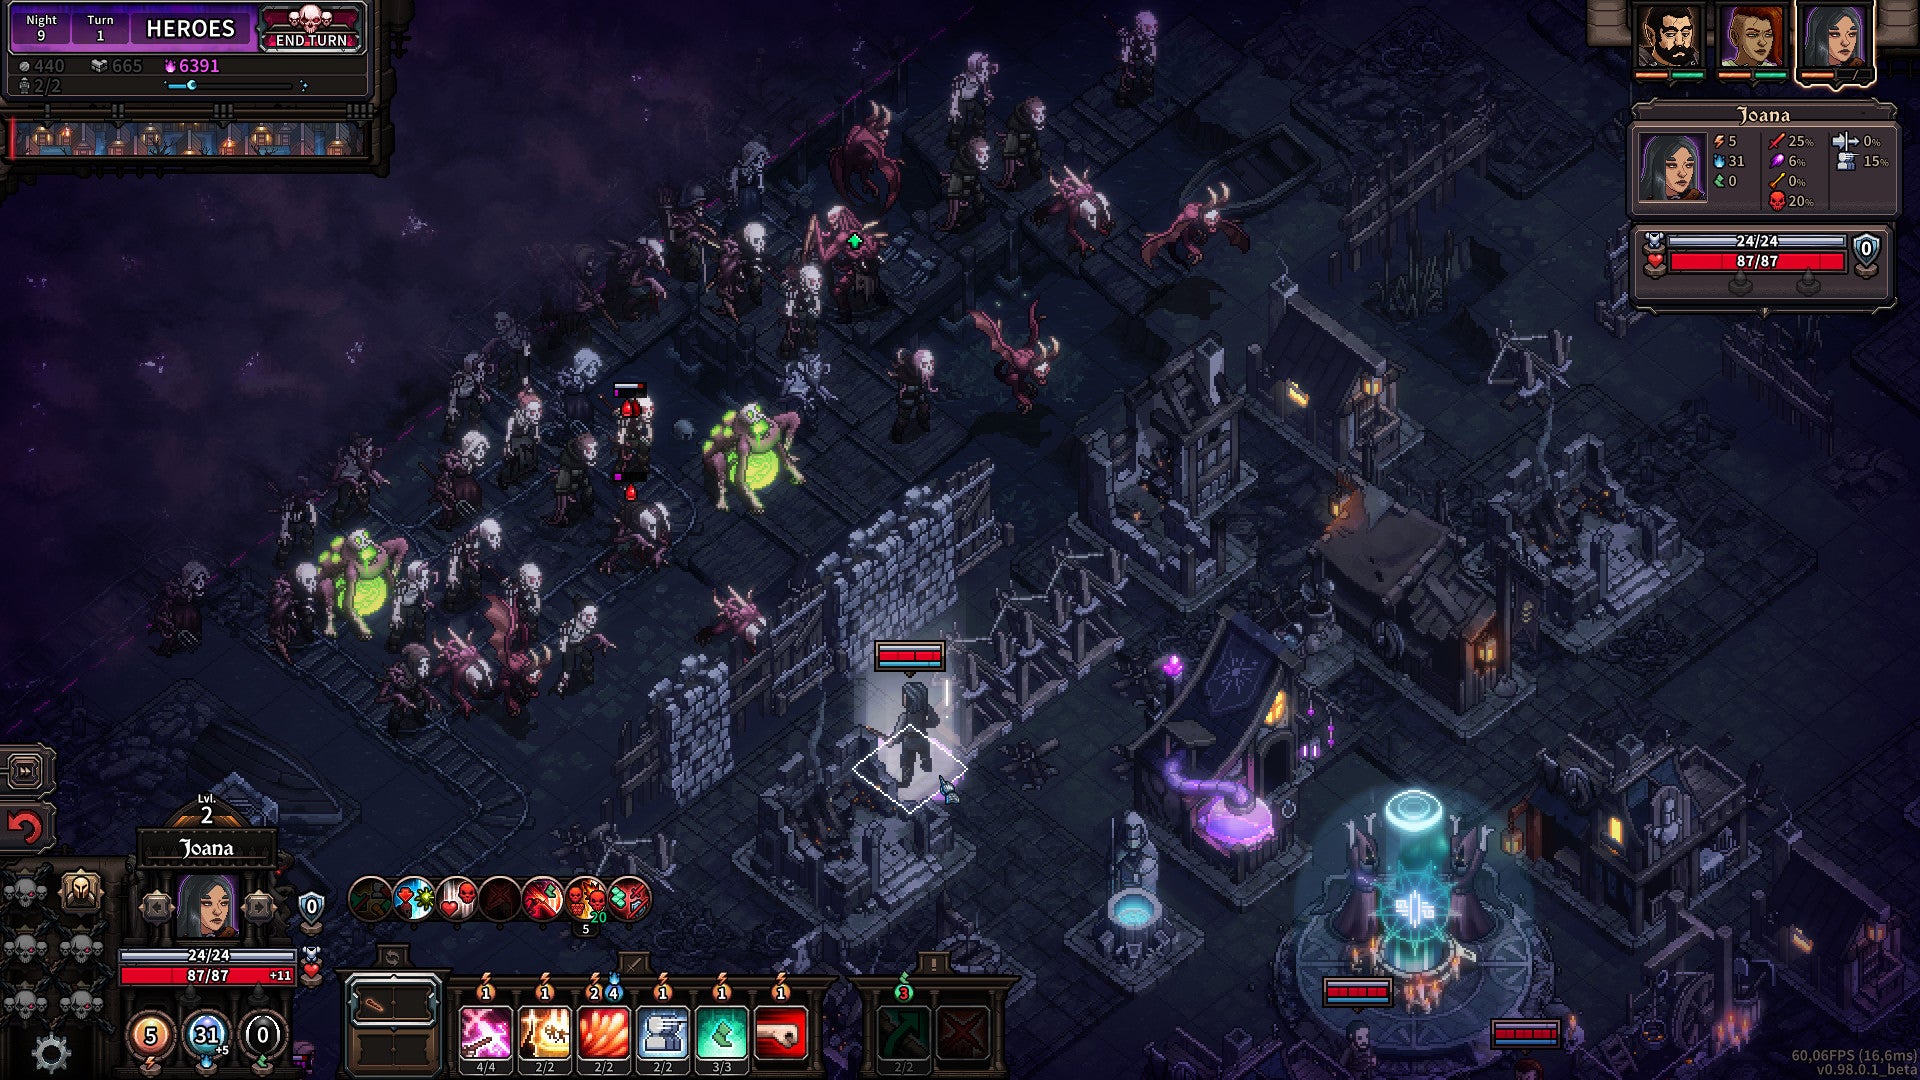 A nighttime raid in The Last Spell, with dozens of mutants on the left attempting to breach the village's walls.